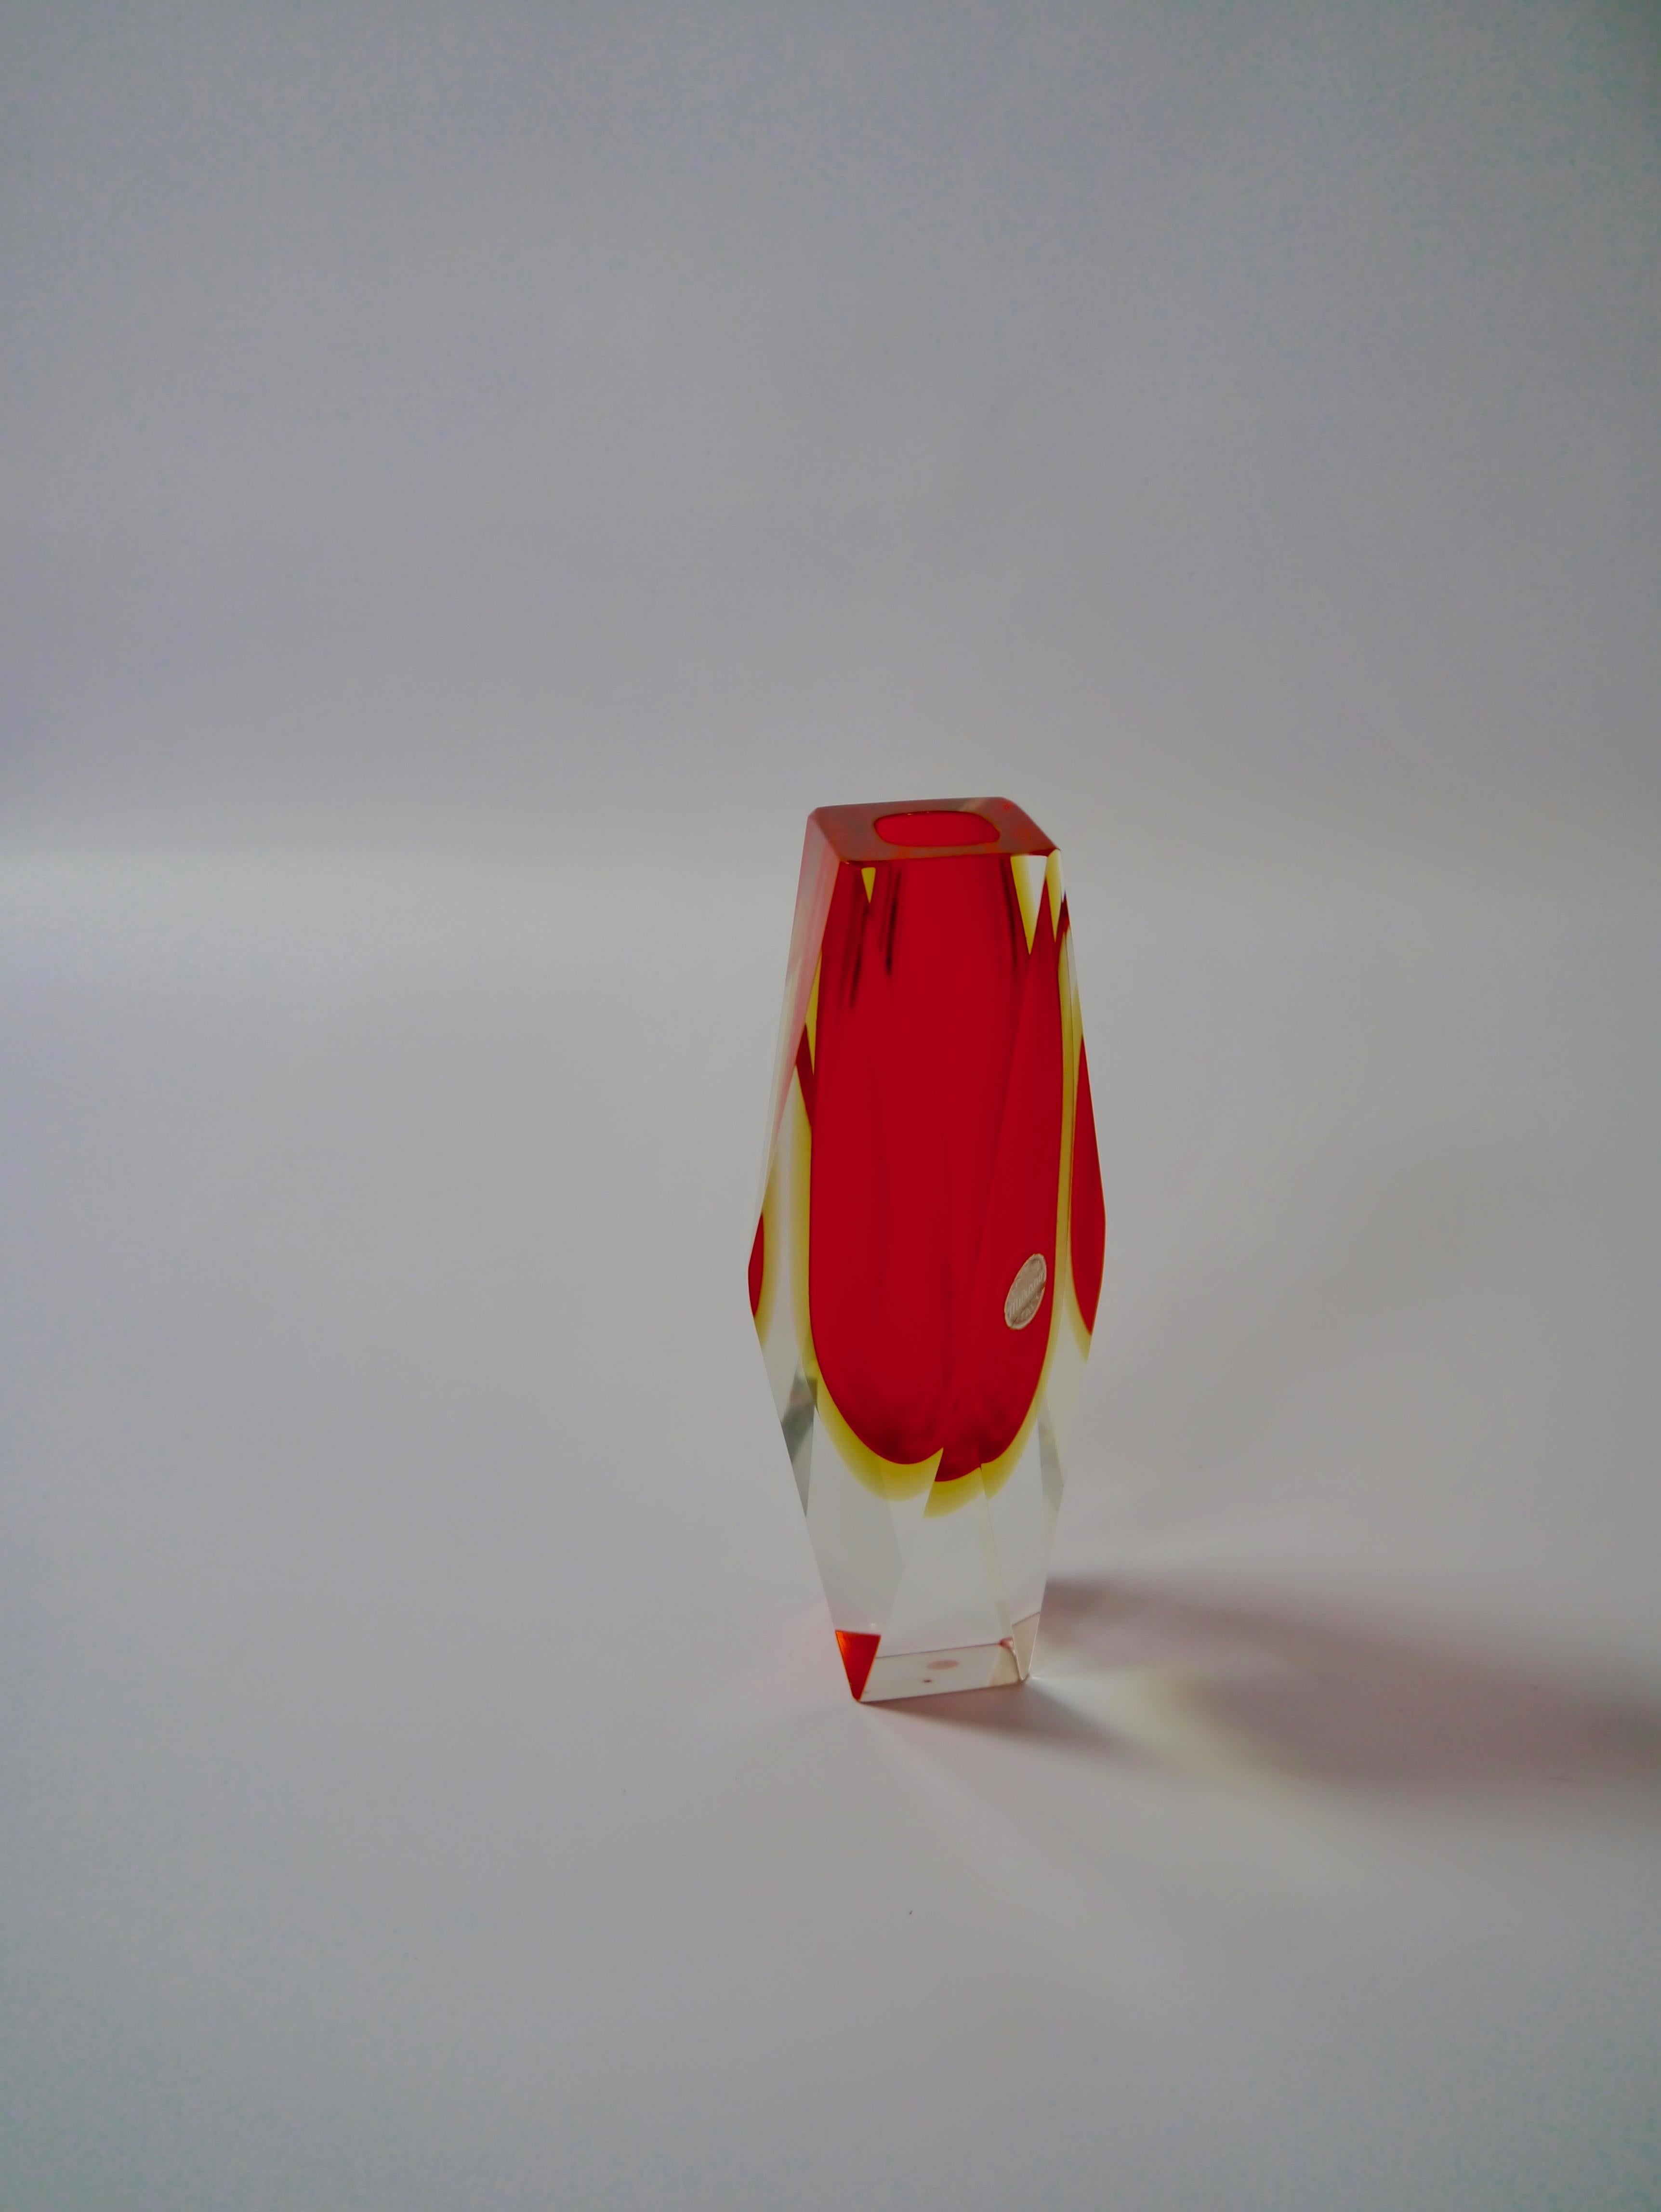 Mid-Century Modern Ruby Red Murano Glass Vase by Mandruzzato for Oball, Italy, 1970s For Sale